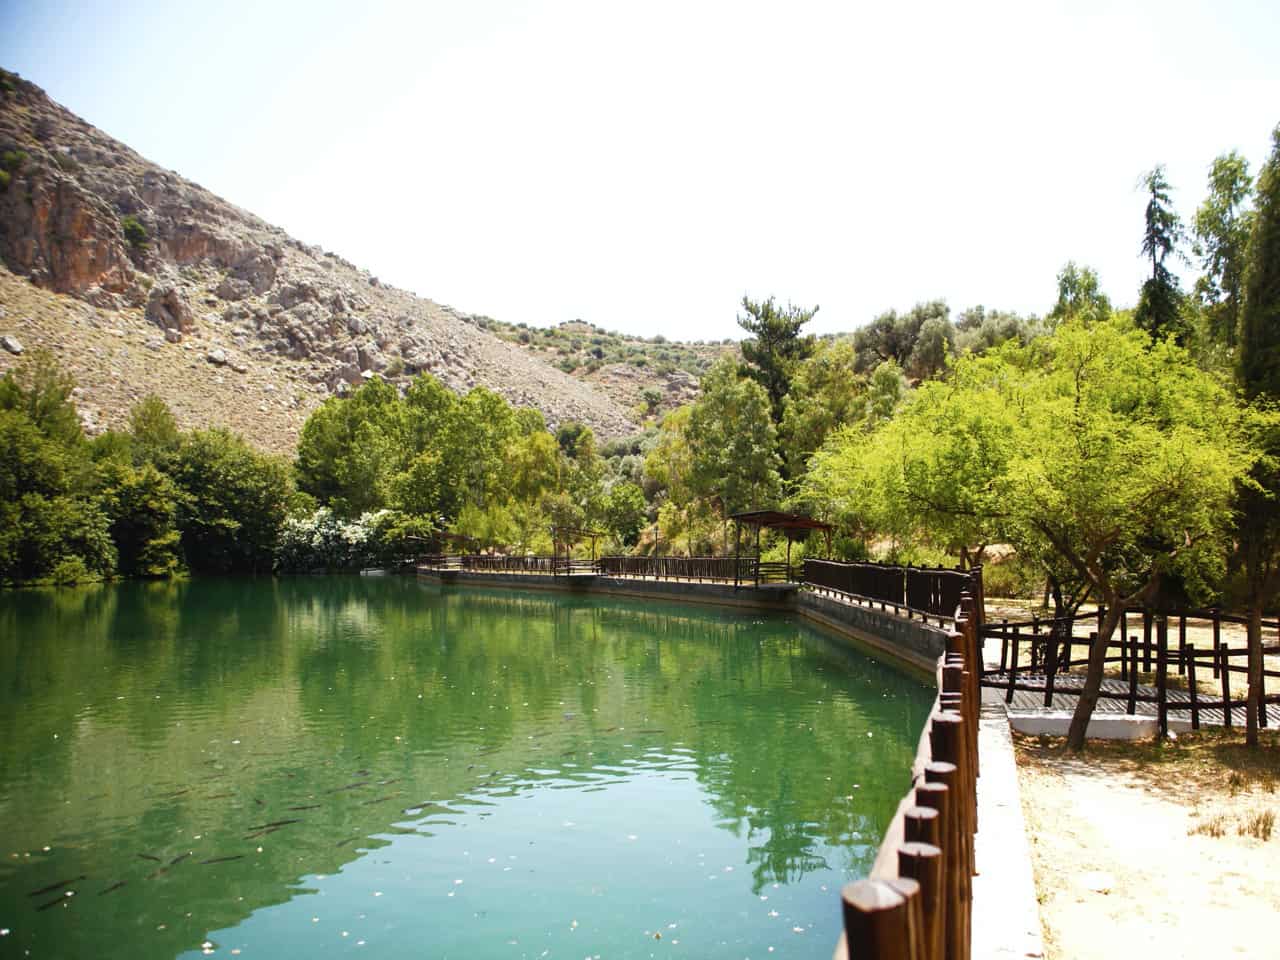 Eleonas Country Hotel Village, eleonas traditional hotel, eleonas traditional cottages, six days hiking eleonas, wild flowers, ancient olive trees and groves, small rivers, monasteries, gorges, secret forests, hidden villages, and old pathways, votomos lake